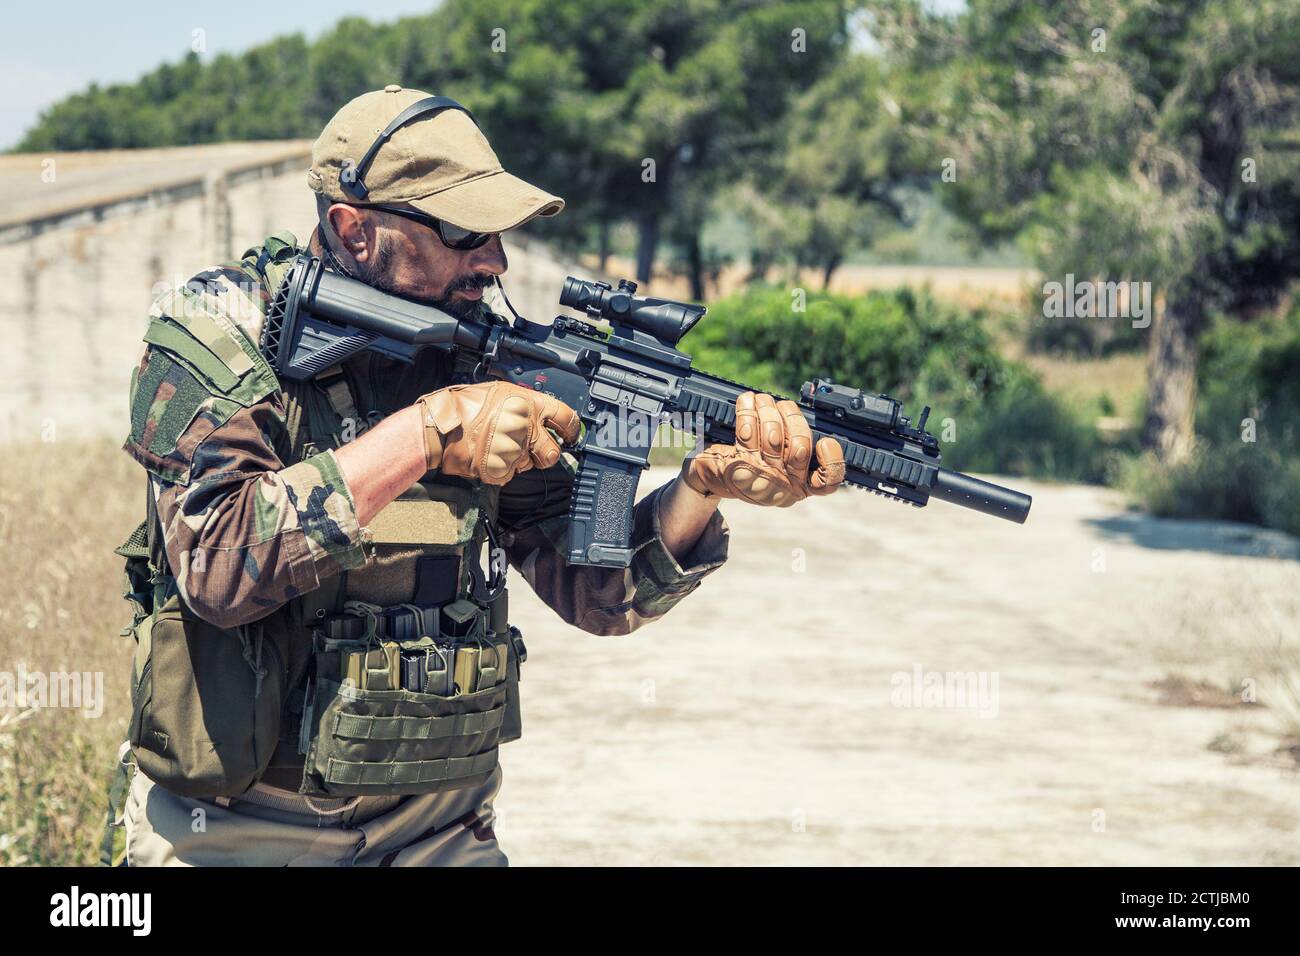 Private military company mercenary, brutal looking special forces fighter in battle uniform and plate carrier, wearing radio headset and sunglasses, holding service rifle in hands, ready to fight Stock Photo